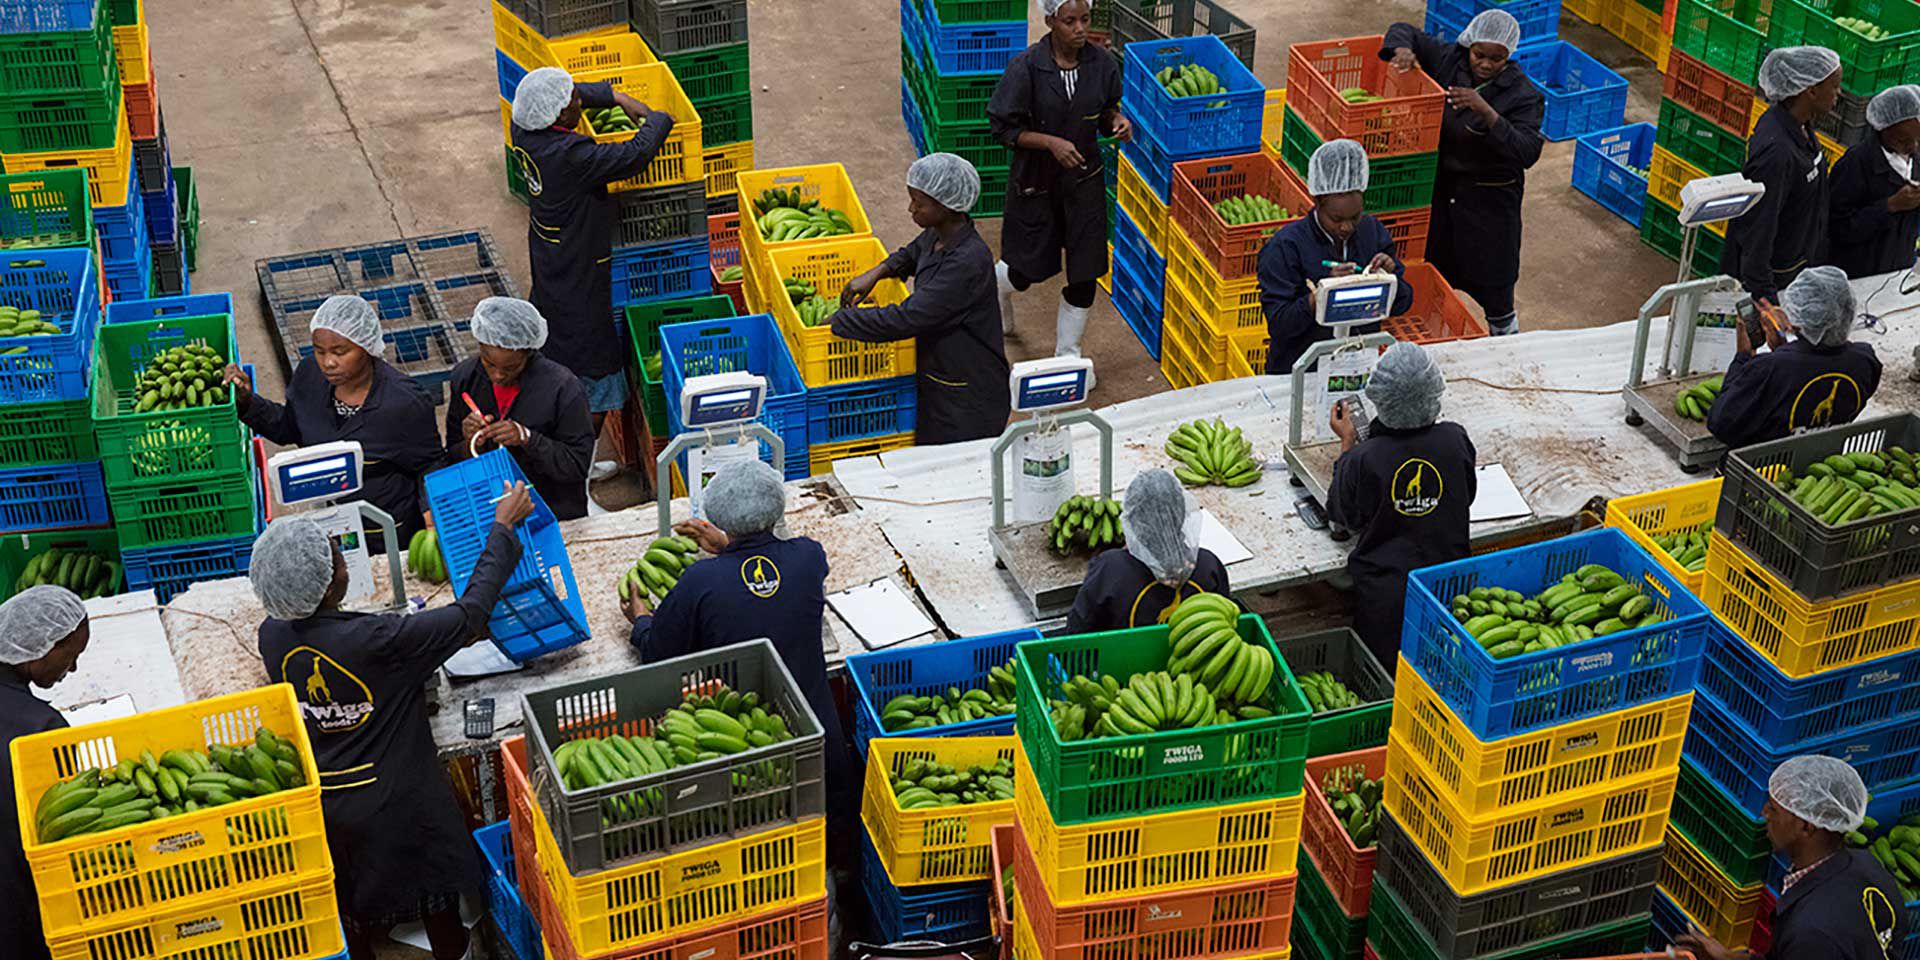 Employees of Twiga Food weigh and organize containers of bananas in the Twiga warehouse in Nairobi, Kenya on February 15, 2018. Photo © Dominic Chavez/International Finance Corporation












 
 



 


 
 

 



















